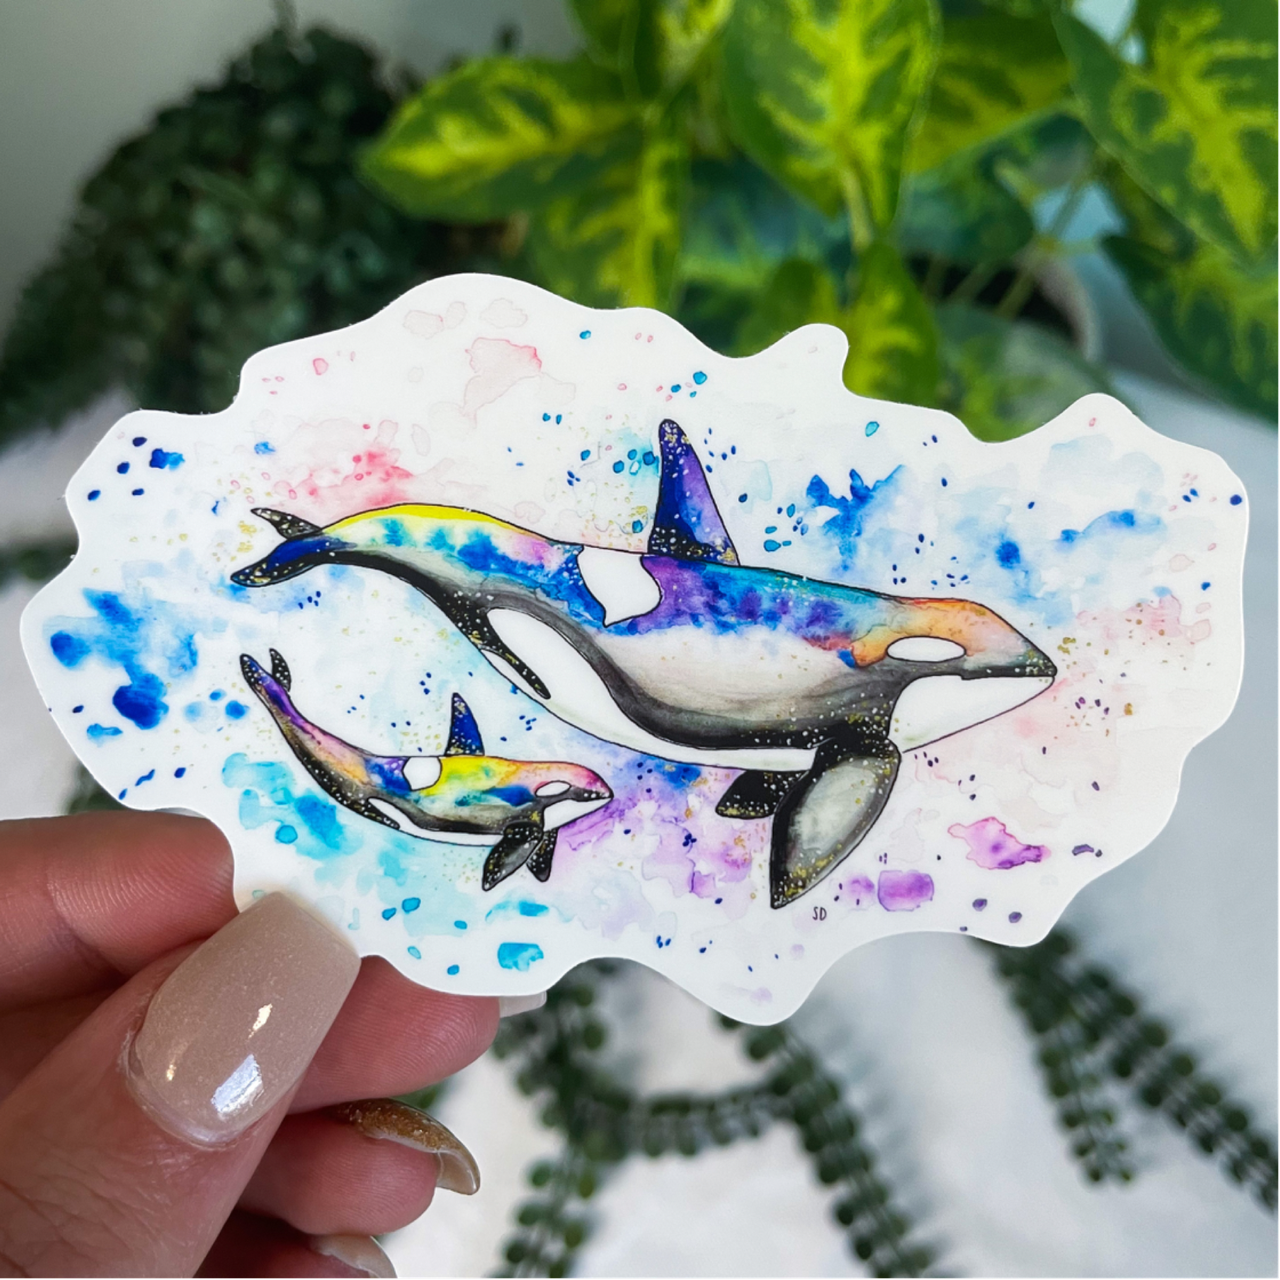 A close-up image of the waterproof, vinyl, dye-cut sticker depicting a watercolor painting from the Wild Planet Creations wild animal collection of rainbow orcas (mother and calf).